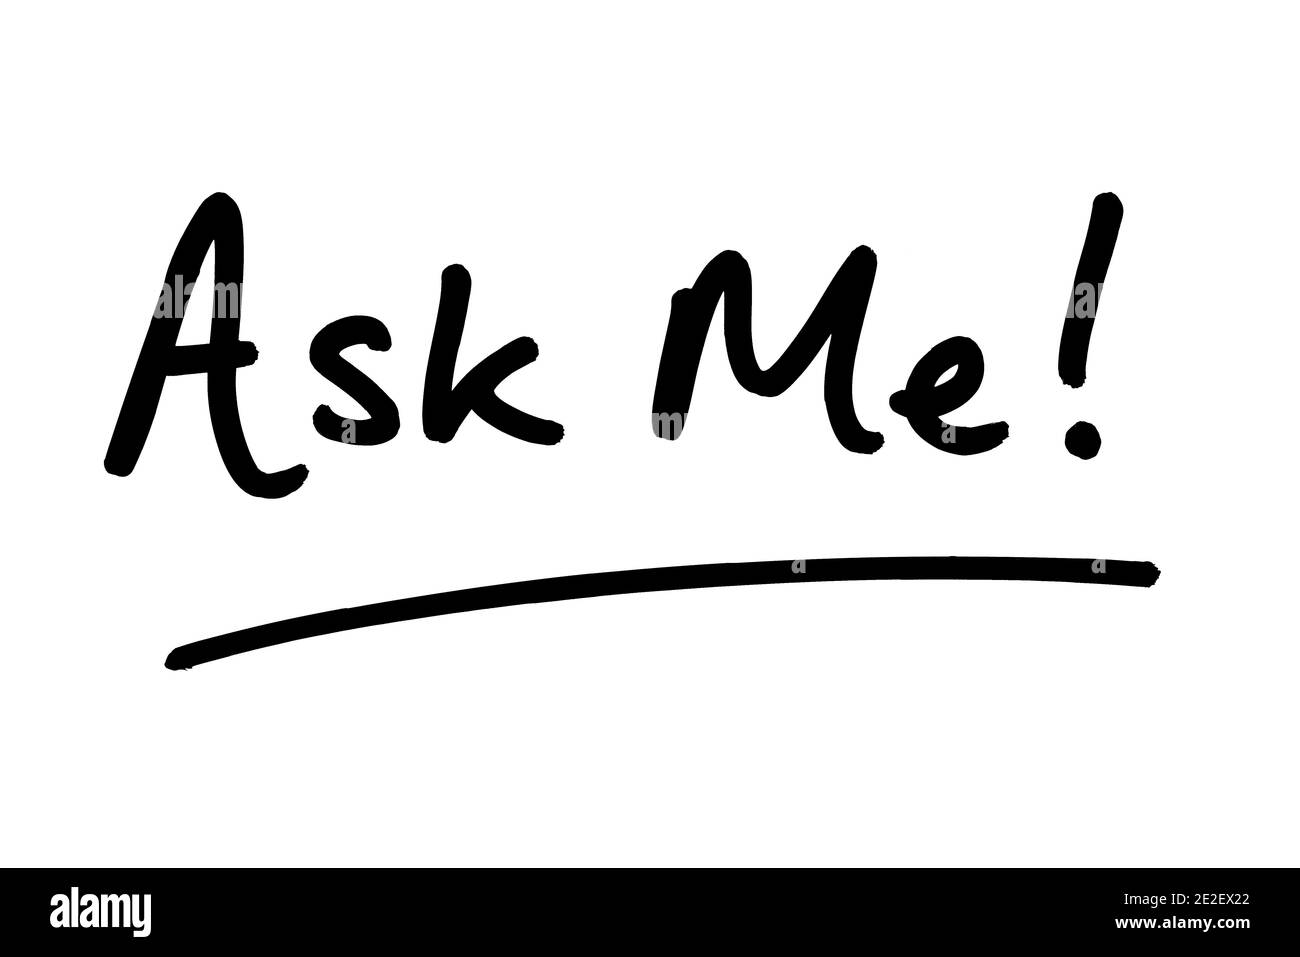 Ask Me! handwritten on a white background. Stock Photo